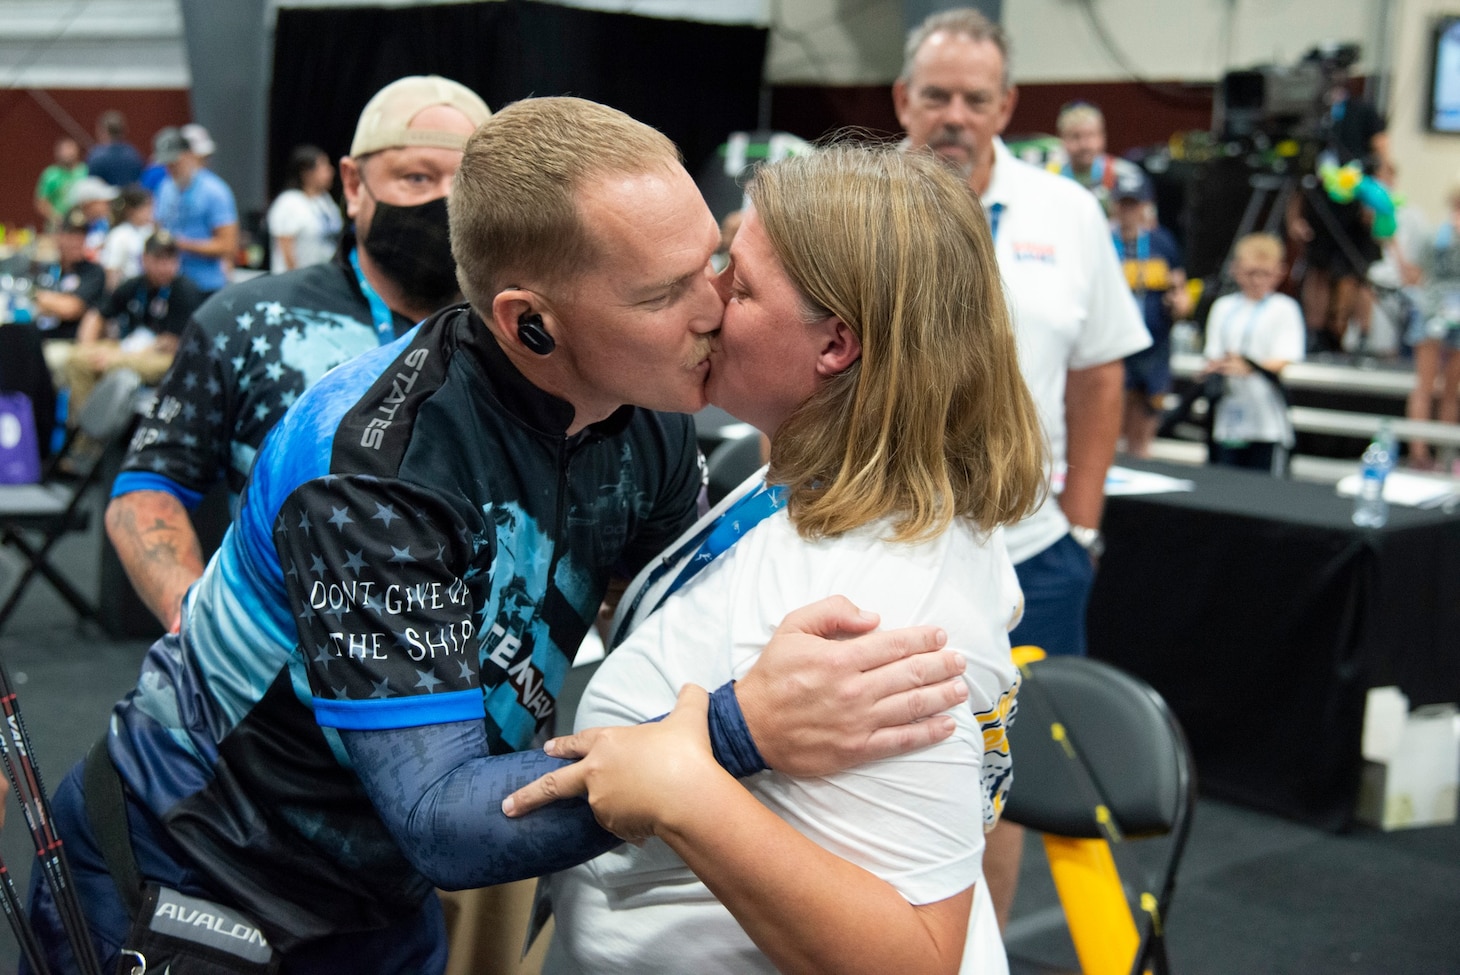 Operations Specialist 1st Class Travis Wyatt and his wife, Teea Wyatt, share a kiss during OS1 Wyatt’s participation in the 2022 Warrior Games in an undated photo.